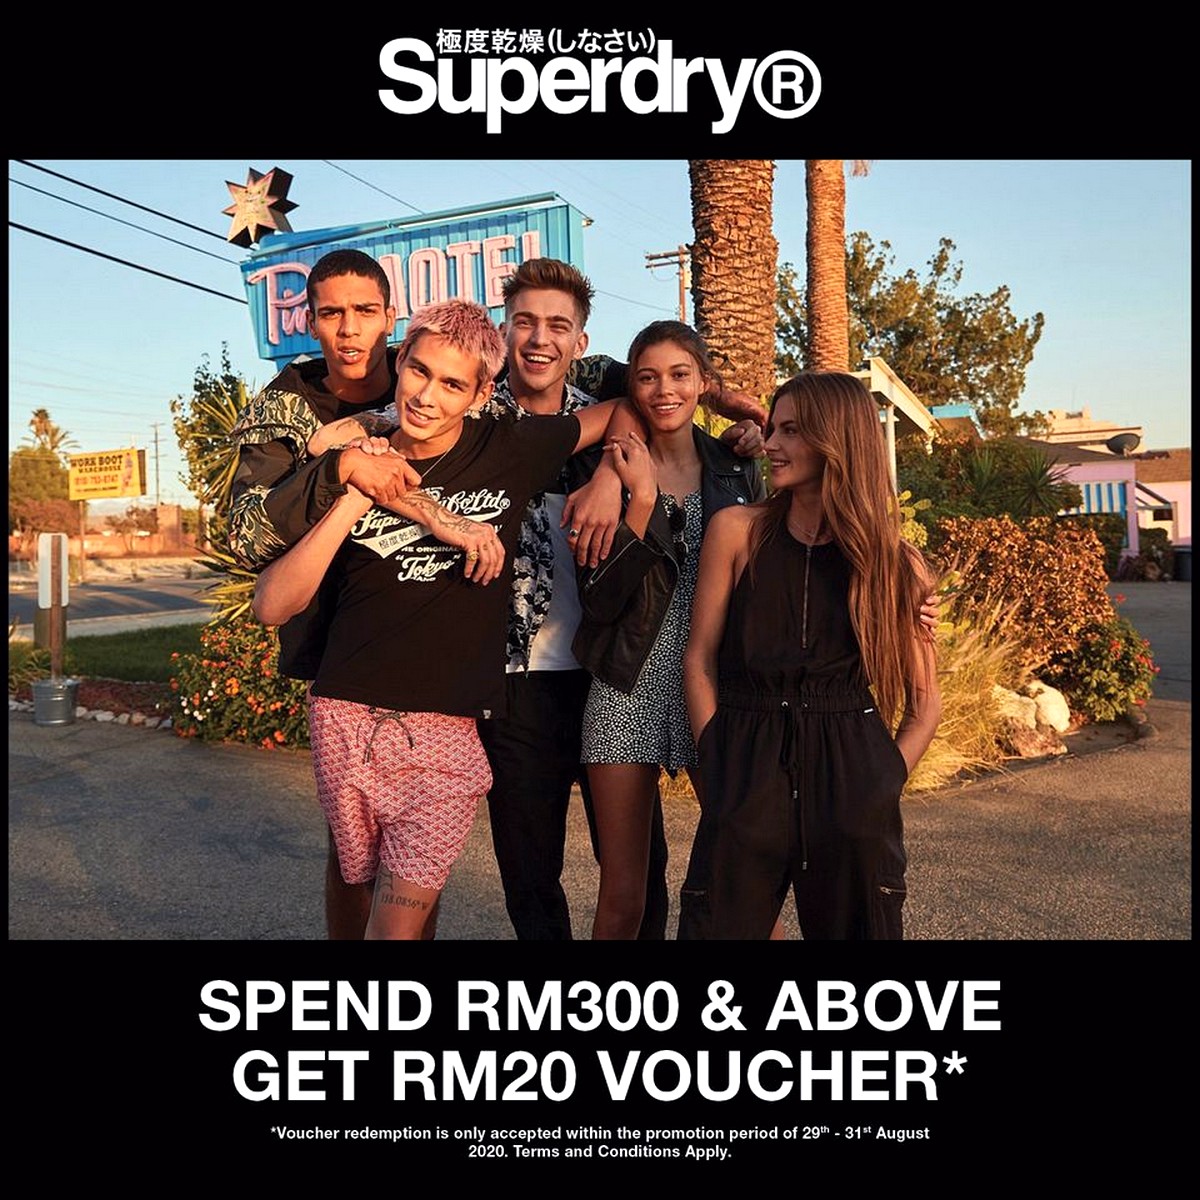 Superdry - Apparels Baby & Kids & Toys Bags Children Fashion Dinnerware Fashion Accessories Fashion Lifestyle & Department Store Fitness Footwear Gifts , Souvenir & Jewellery Handbags Home & Garden & Tools Jewels Kitchenware Kuala Lumpur Outdoor Sports Putrajaya Selangor Shopping Malls Sports,Leisure & Travel Sportswear Sunglasses Wallets Warehouse Sale & Clearance in Malaysia 